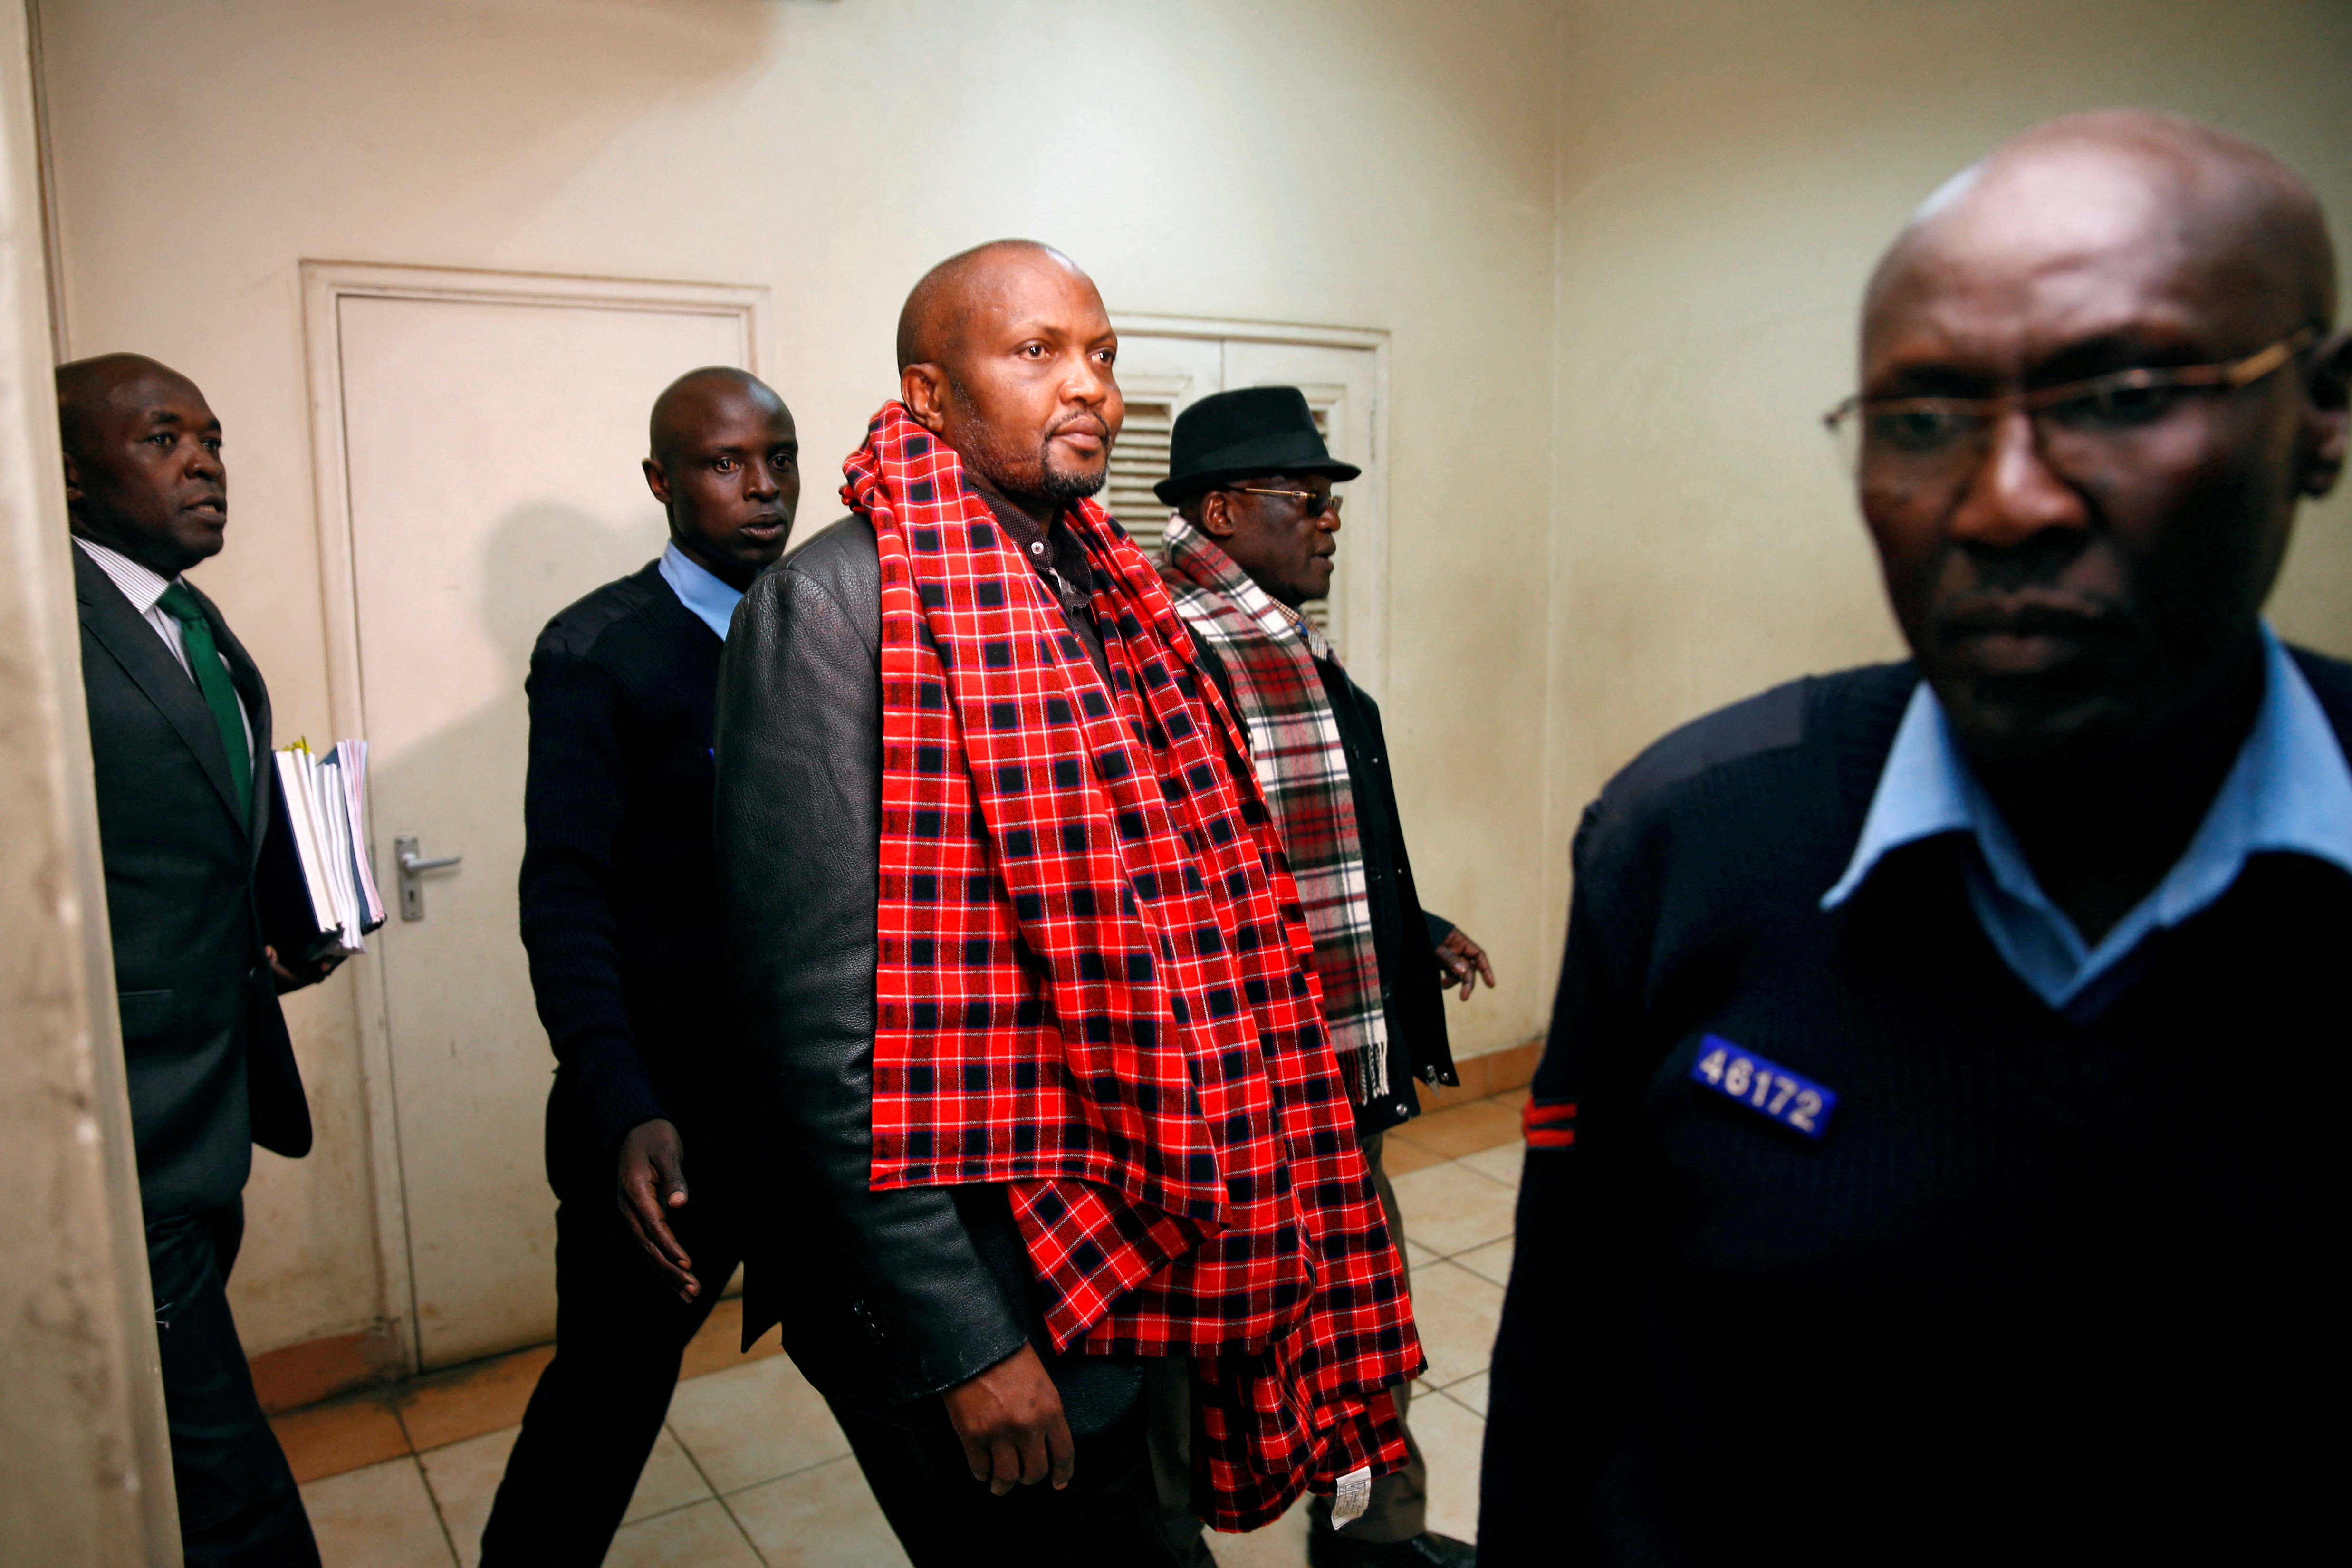 Kenyan member of parliament Moses Kuria of the Jubilee Party is brought to court after being arrested over hate speech allegations in Nairobi